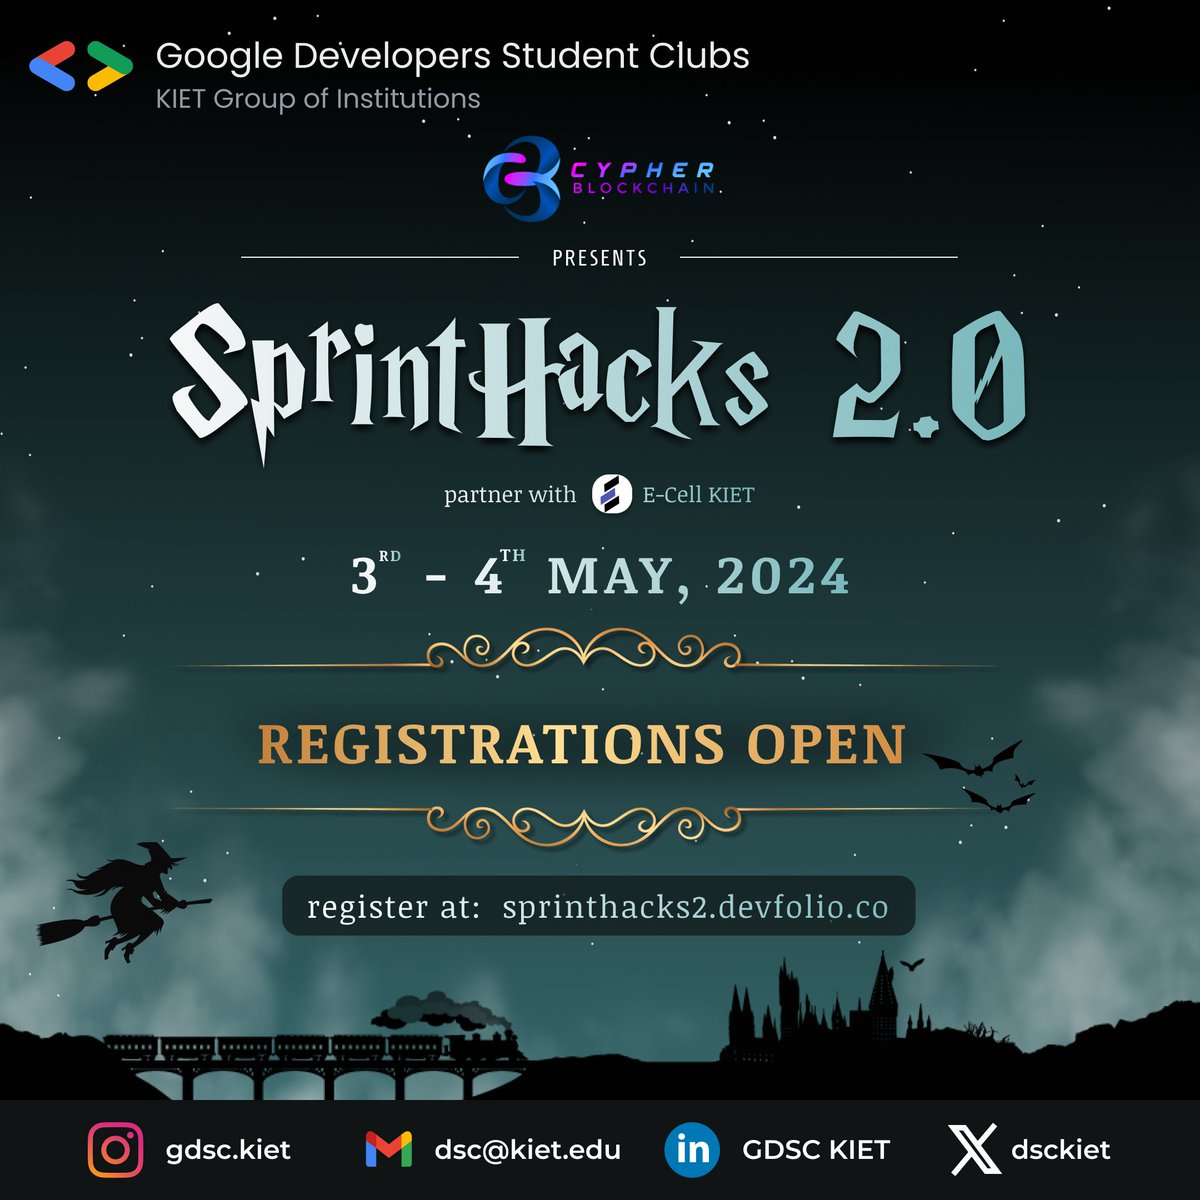 Wait ends here!! The registration for Sprinthacks2.0 is officially open now!!🥳 Gear up with your team for the much awaited coding season.✨ Dates: 3rd - 4th May 2024 Register at: sprinthacks2.devfolio.co Visit us: sprinthacks.in #googlefordevelopers #gdsc #hackathon